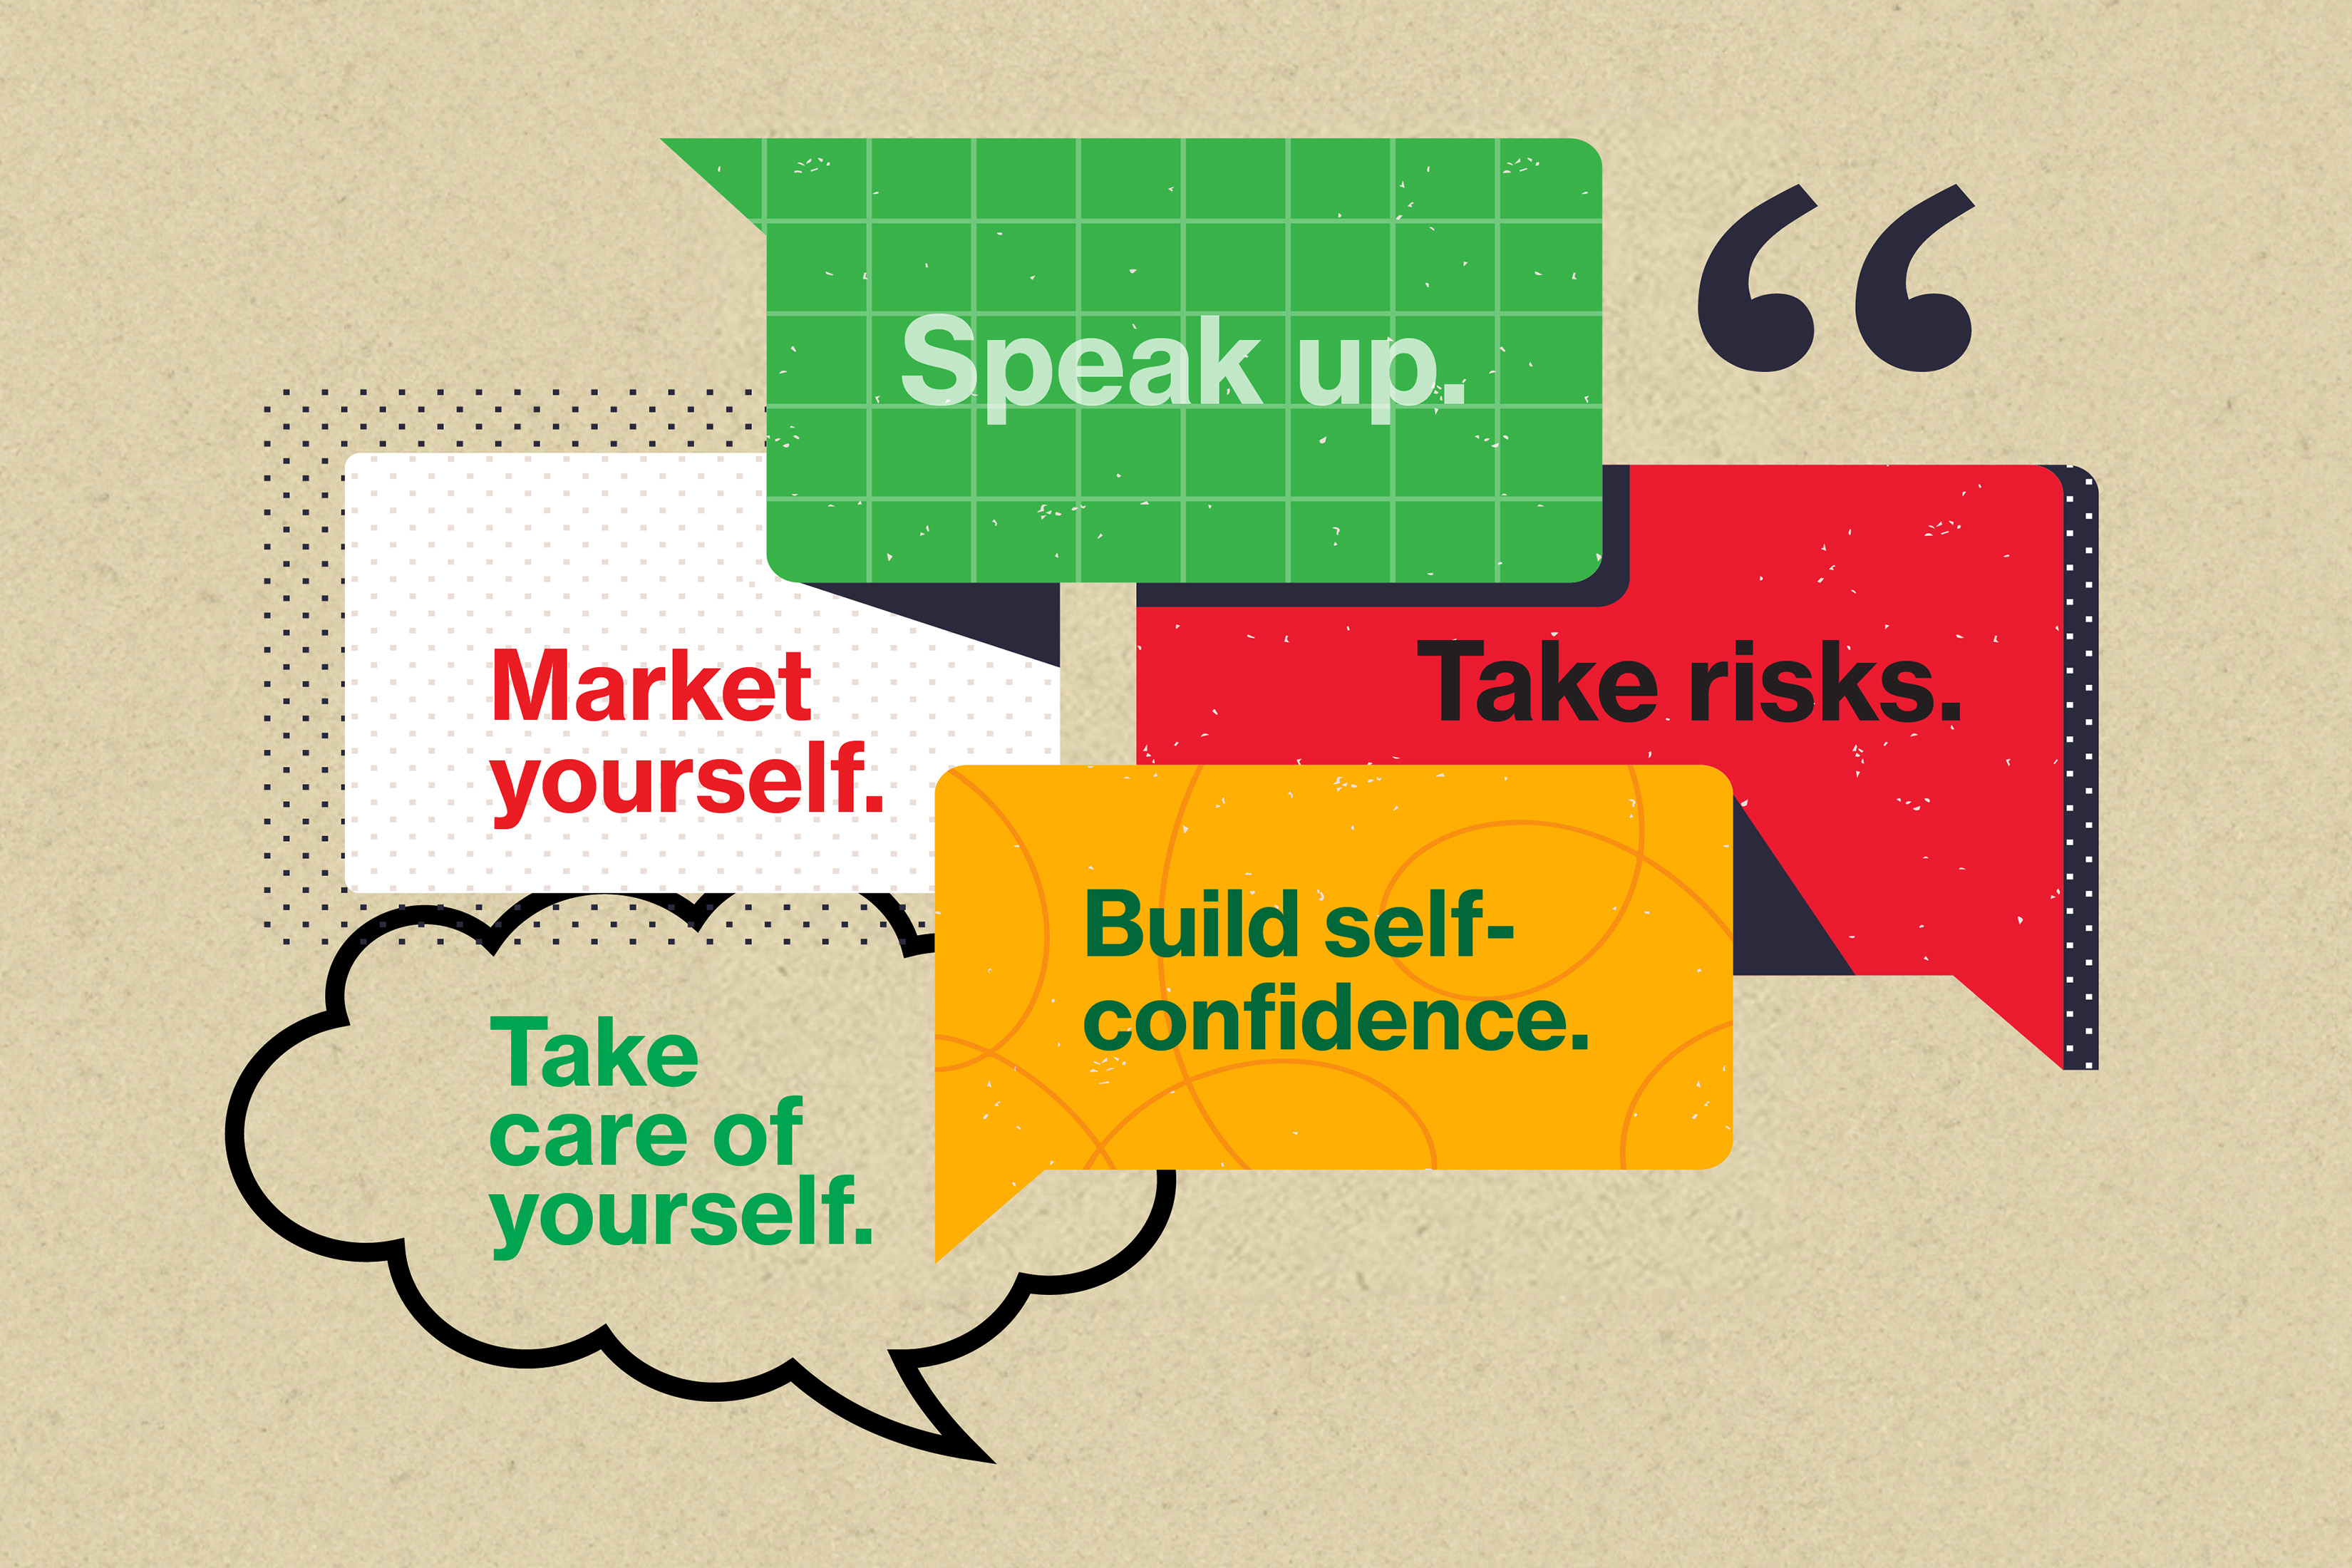 Illustration shows colored quote boxes, each with a different phase. They read: Speak up. Take risks. Build self-confidence. Market yourself. Take care of yourself. 